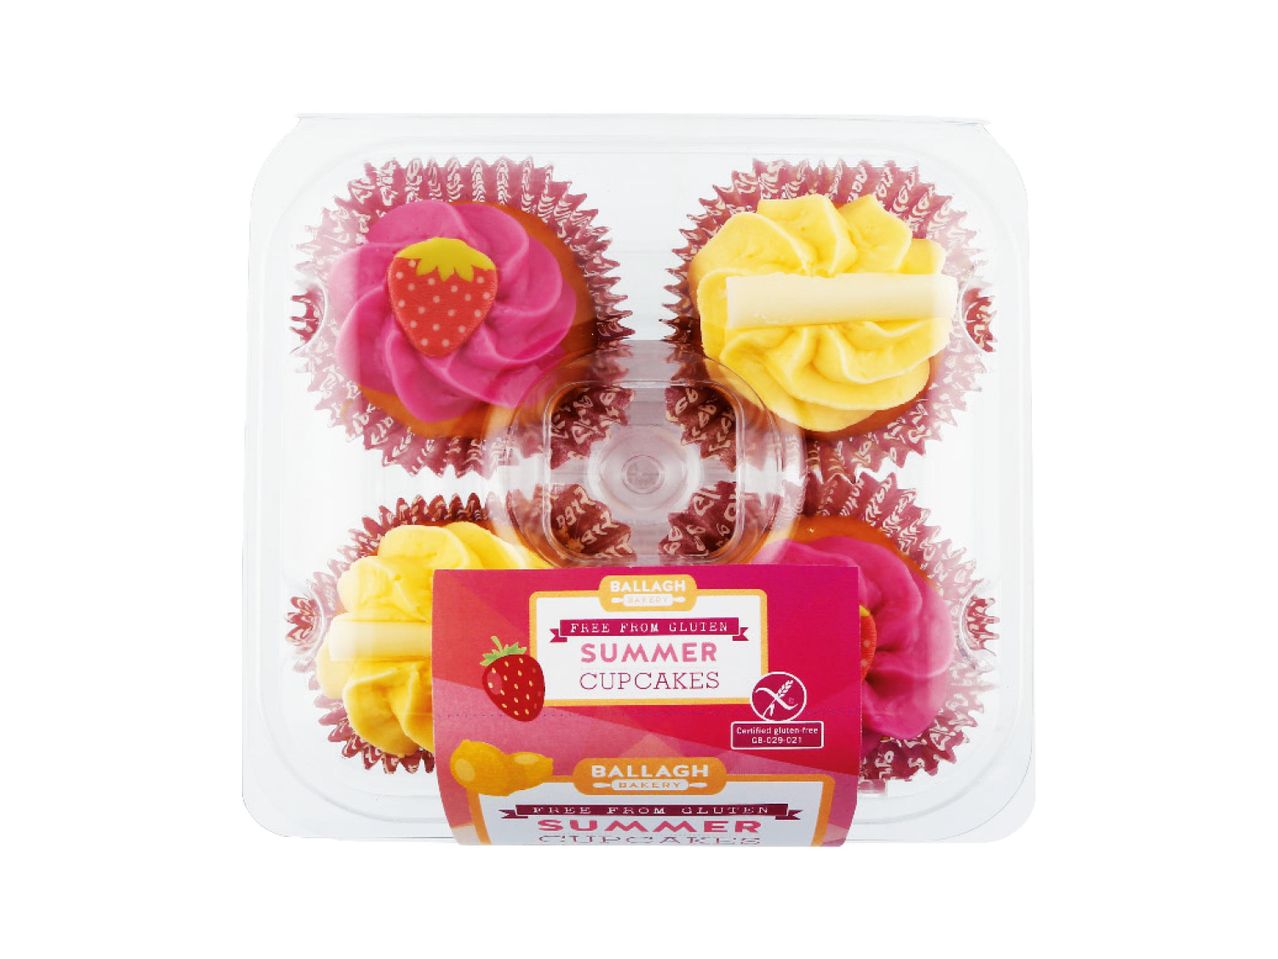 Go to full screen view: Gluten Free Summer Cupcakes 4 pack - Image 1